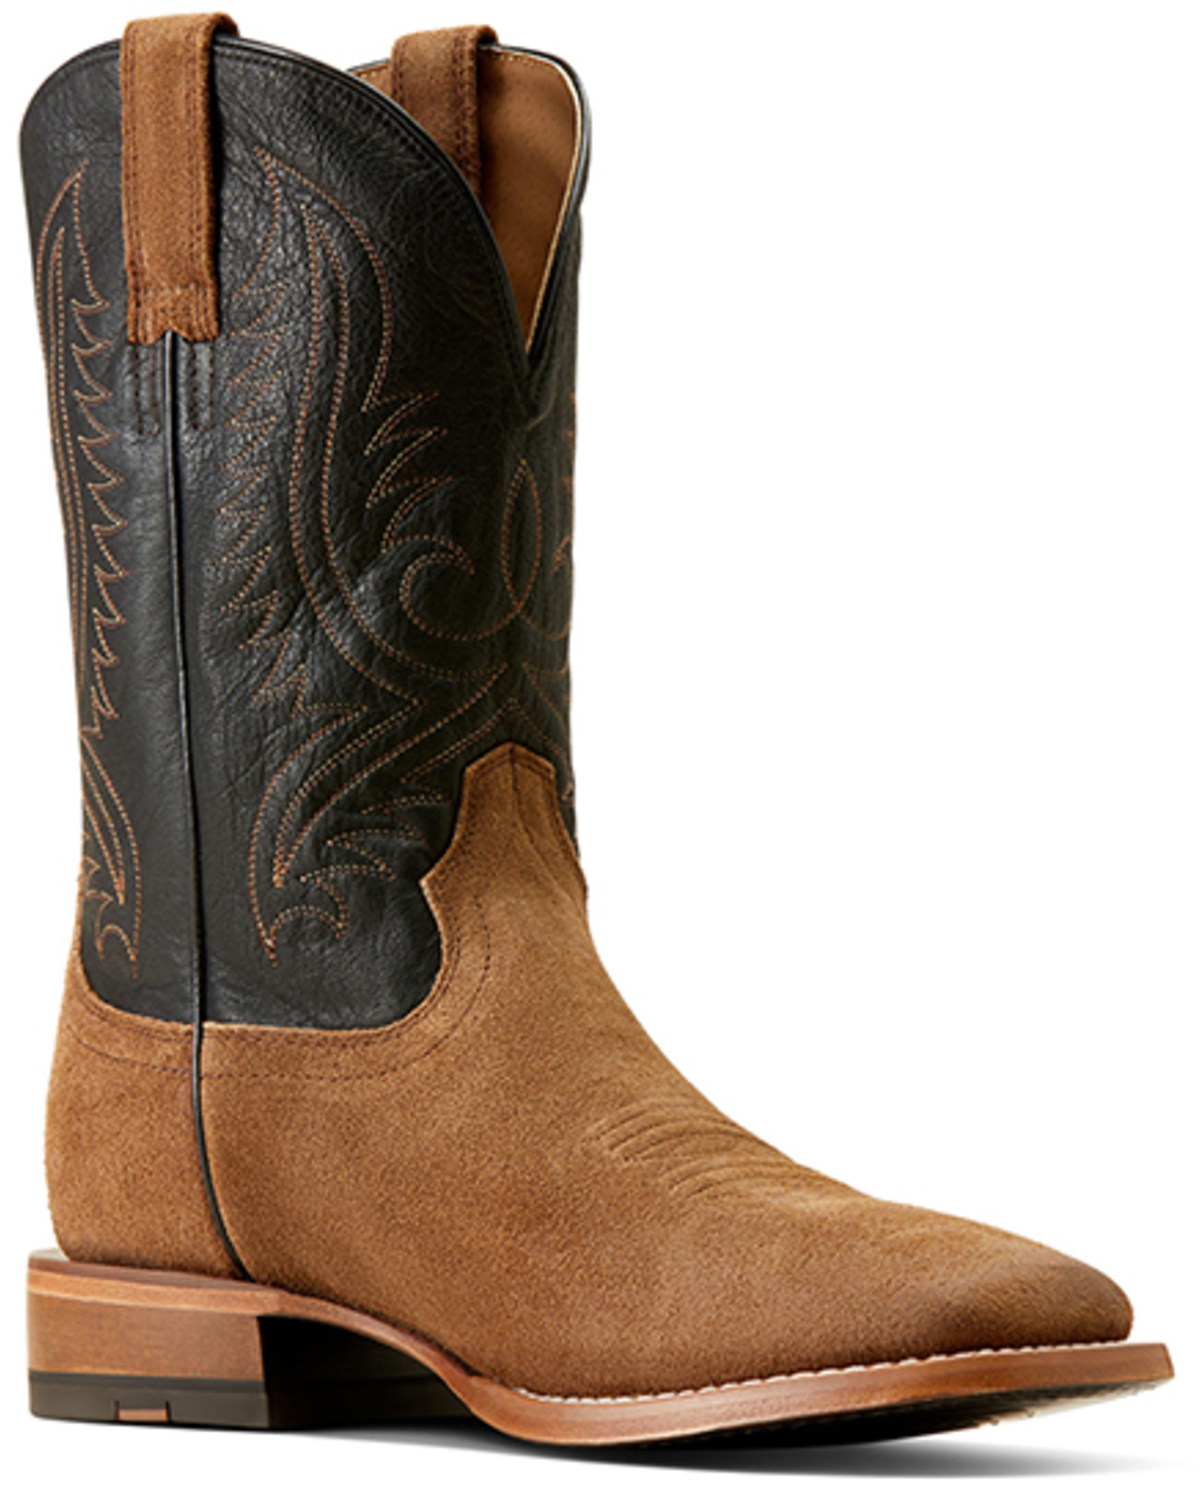 Ariat Men's Circuit Paxton Suede Western Boots - Broad Square Toe